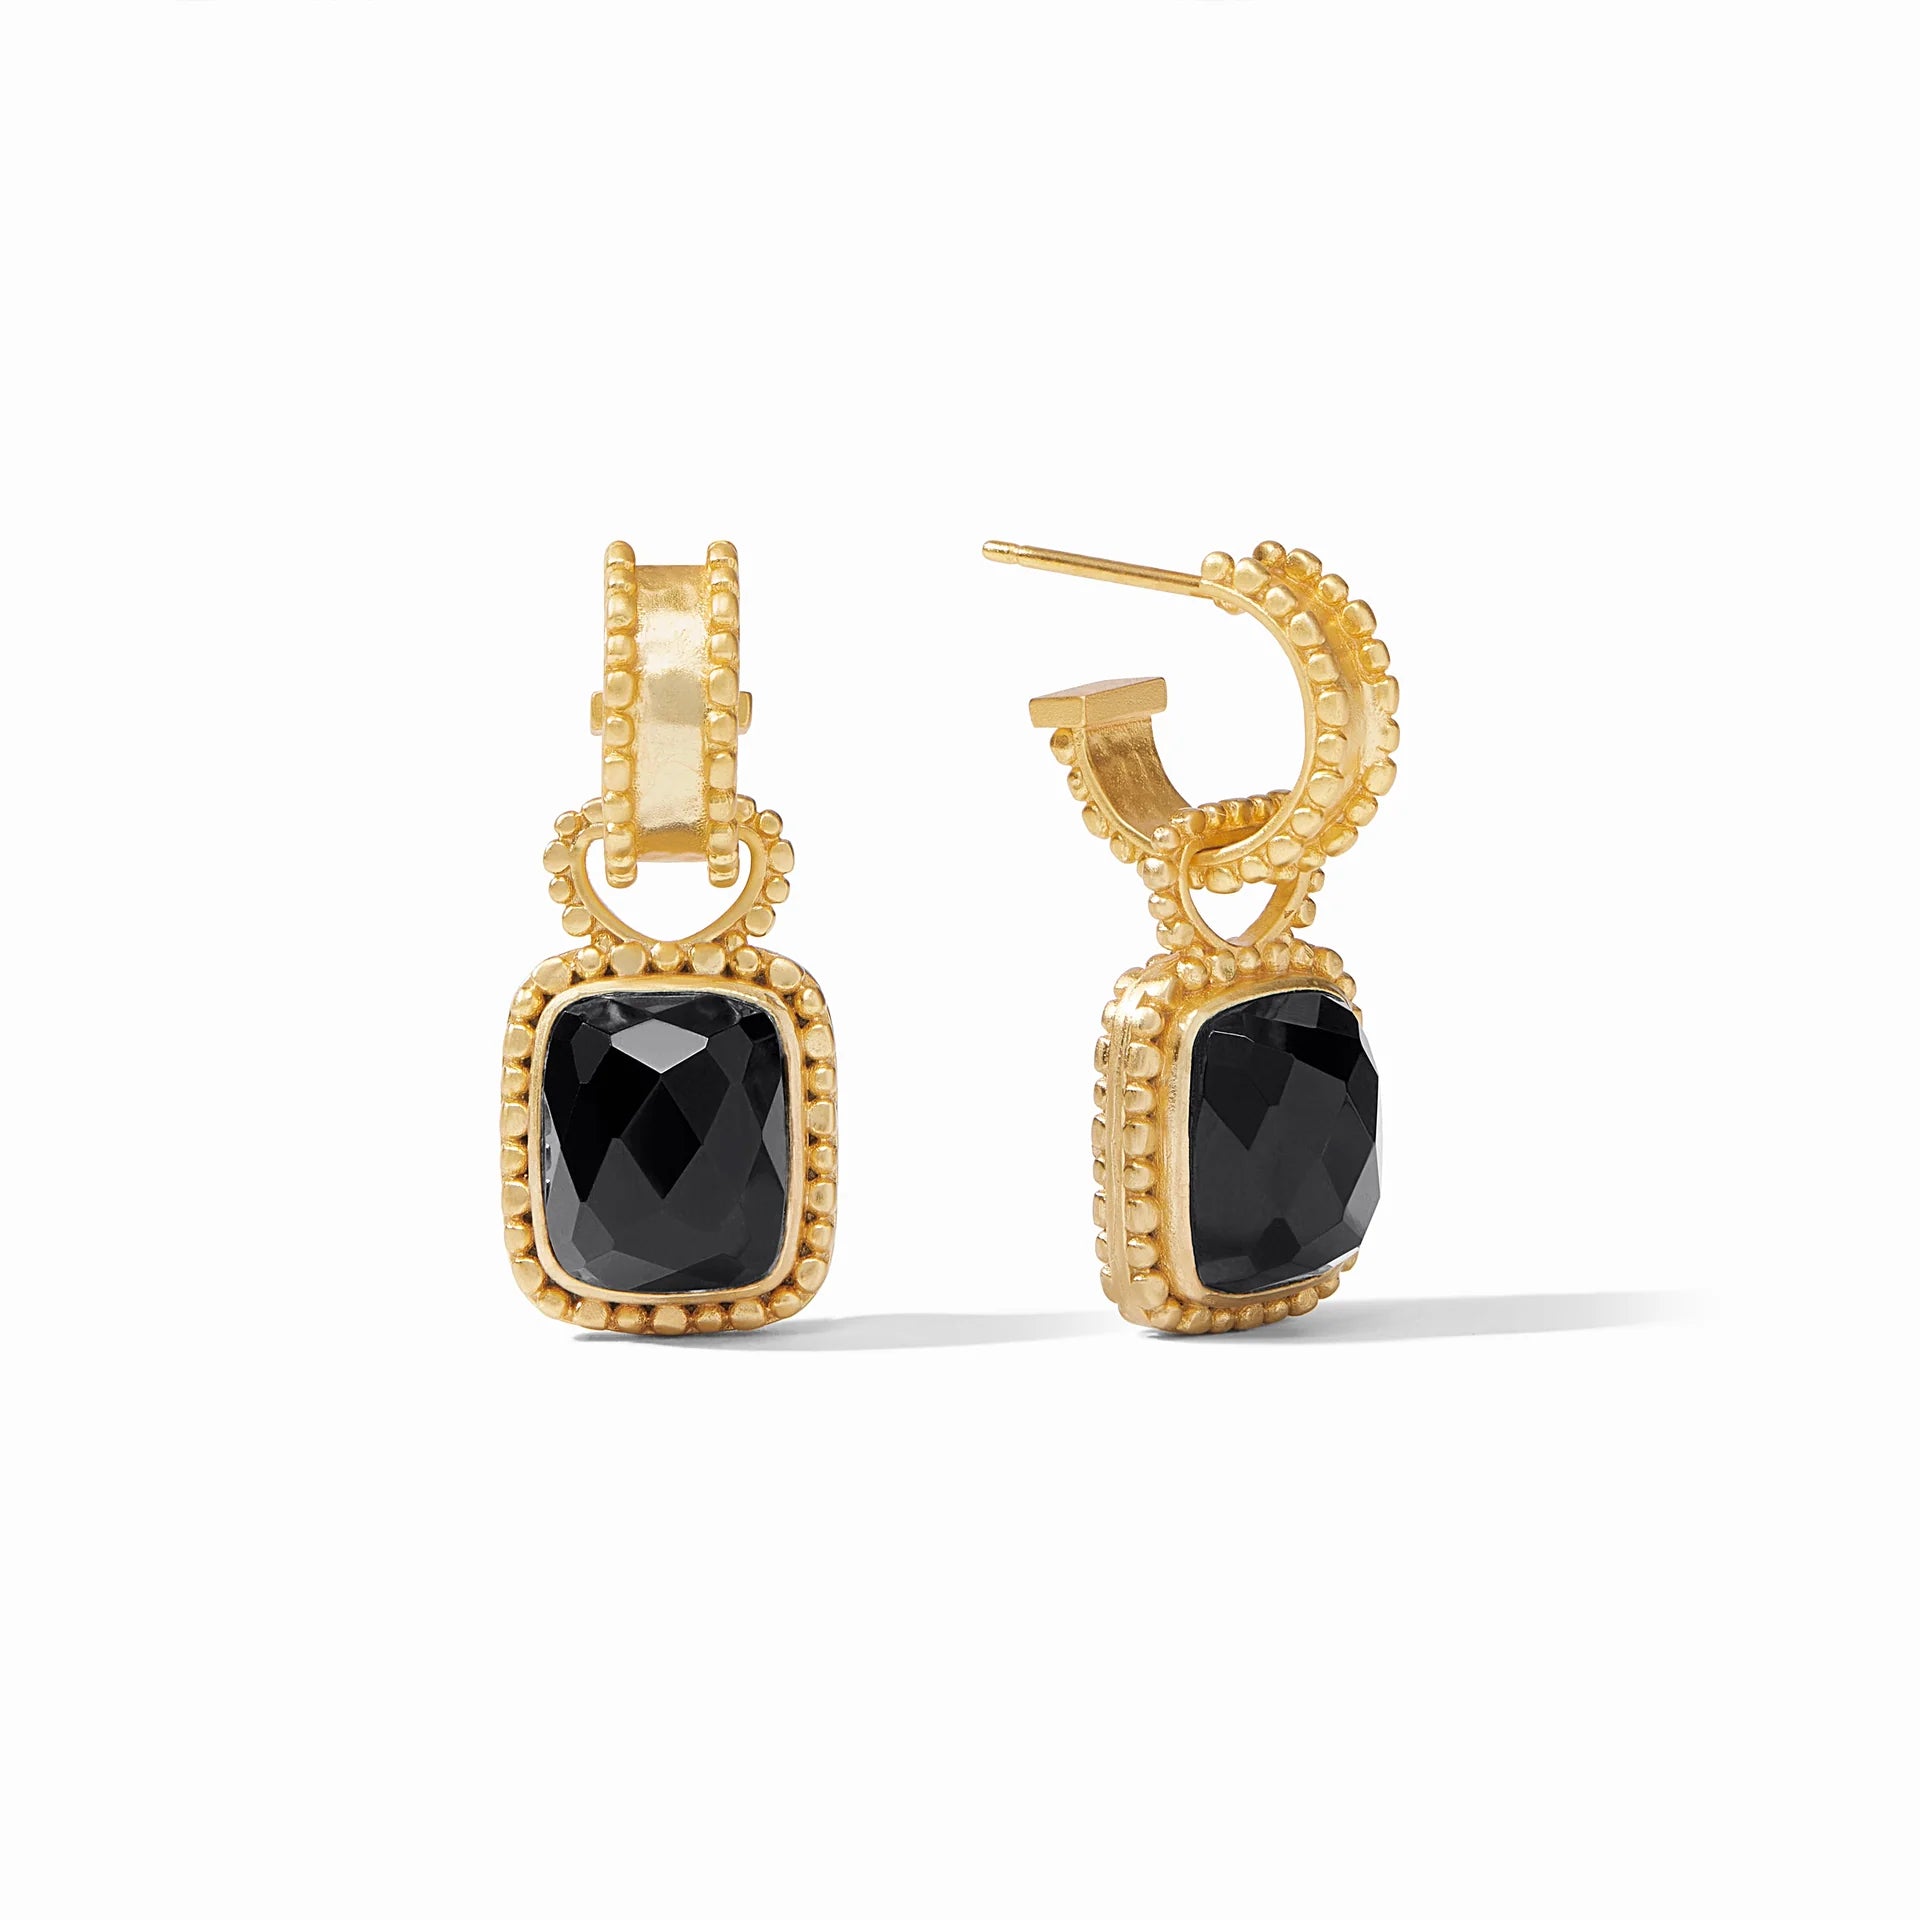 Julie Vos | Marbella Gold Hoop Earrings & Charm in Obsidian Black - Giddy Up Glamour Boutique